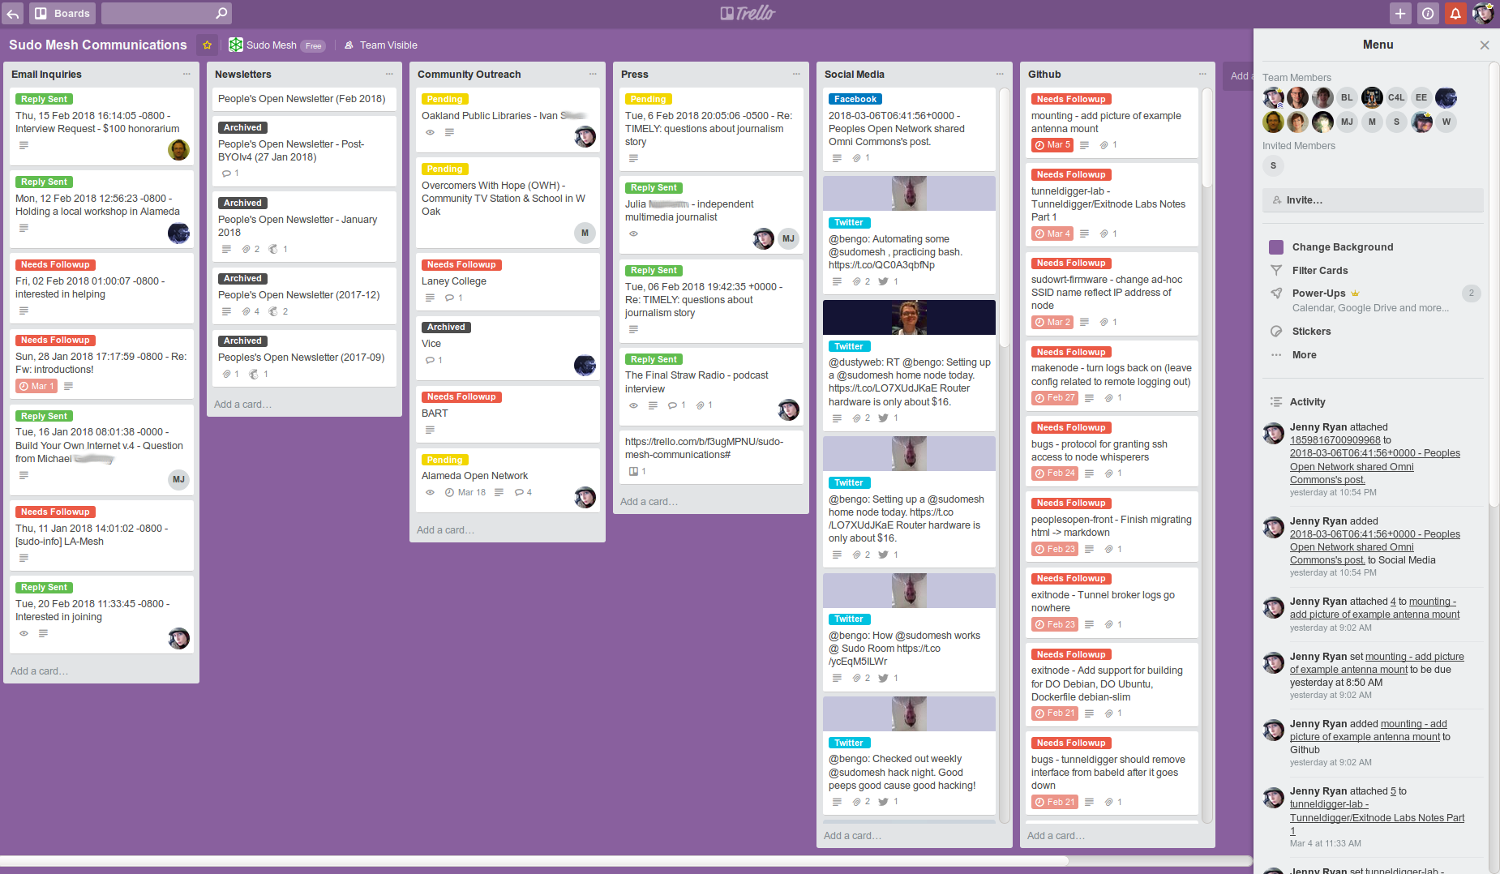 Communications Board: Lists are: Email Inquiries, Newsletters, Community Outreach, Press, Social Media, and Github